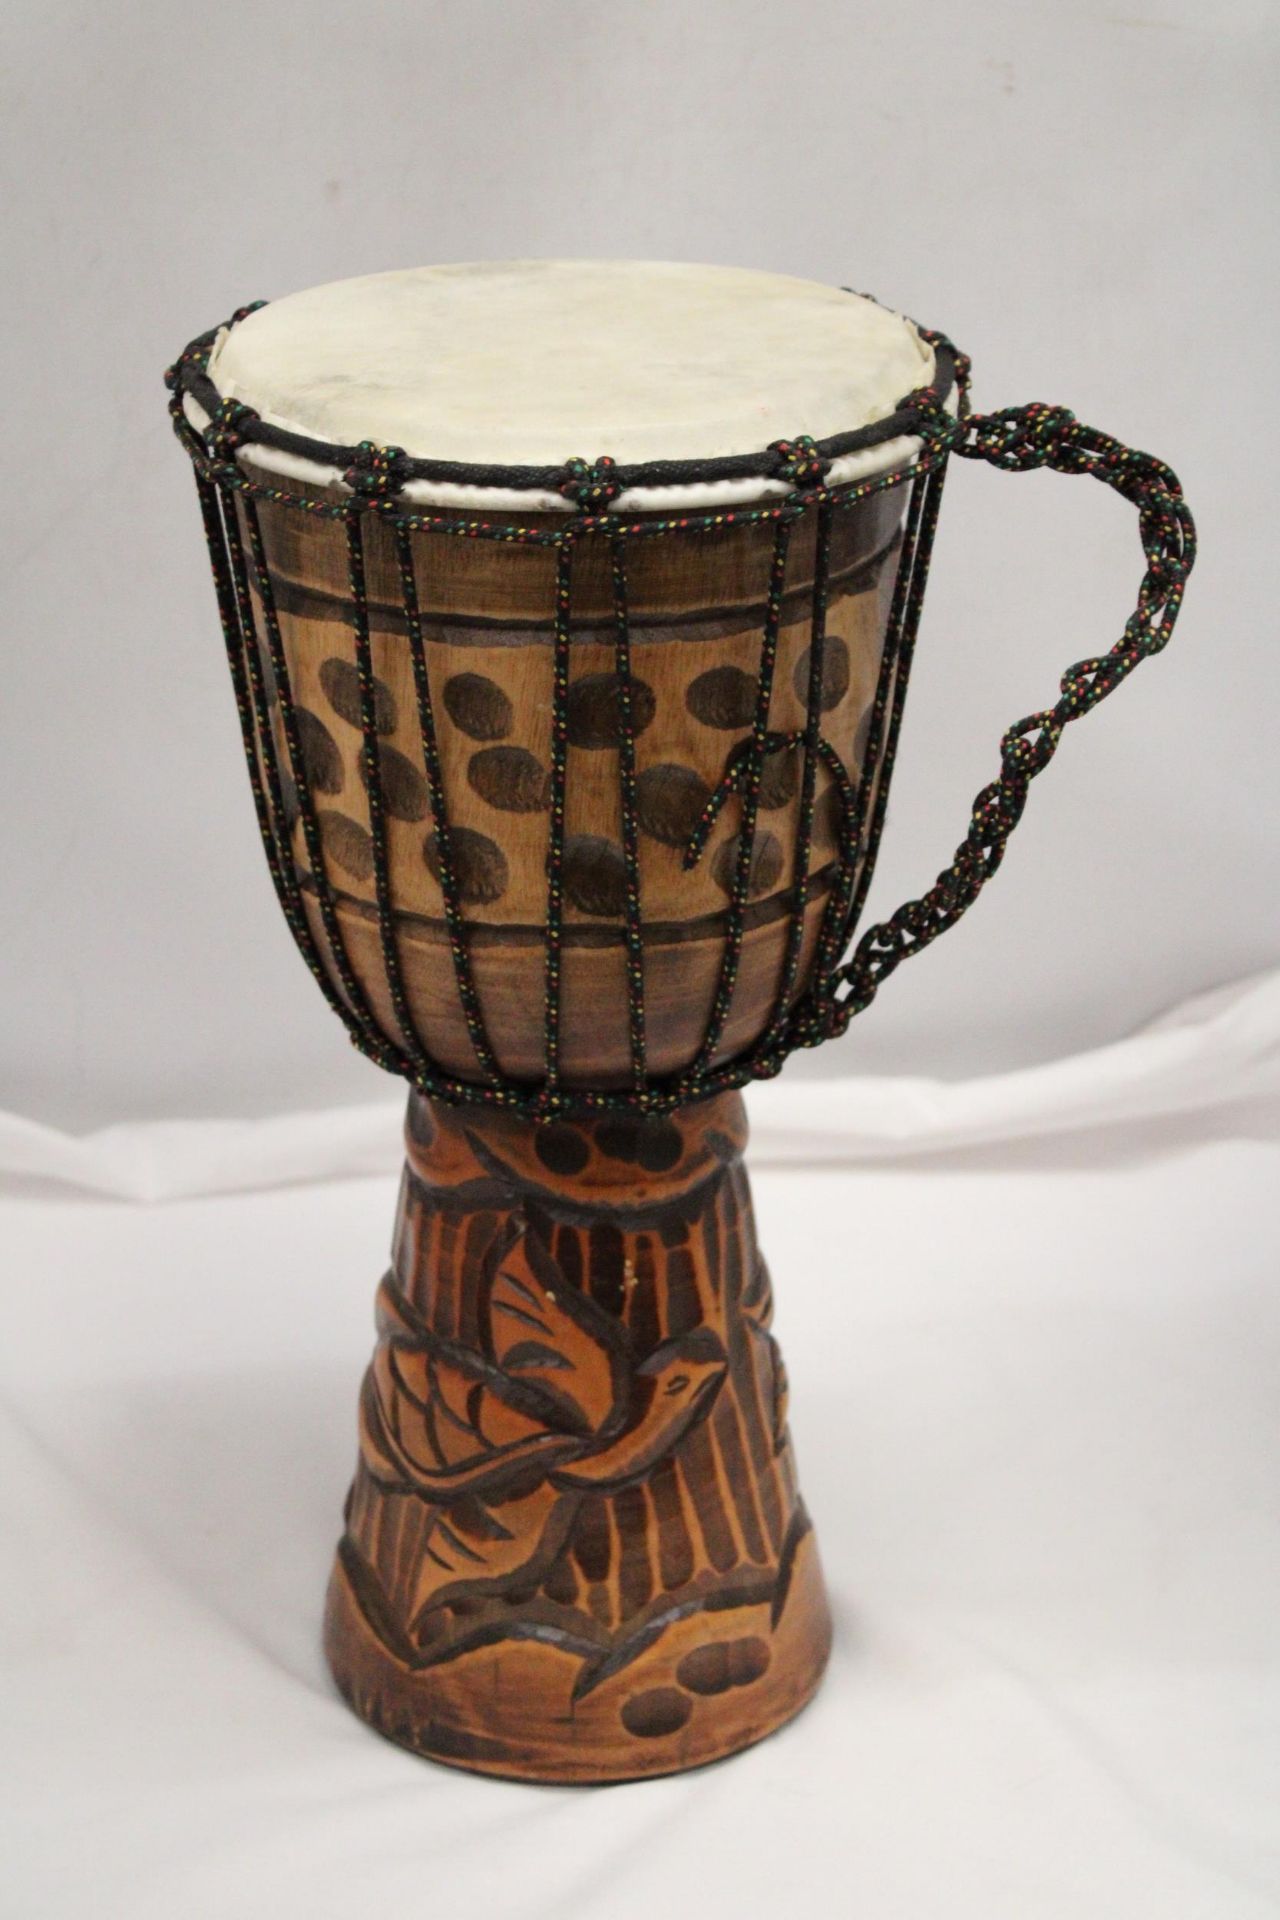 A WOODEN HAND CARVED BONGO DRUM APPROXIMATELY 40CM HIGH - Image 3 of 4